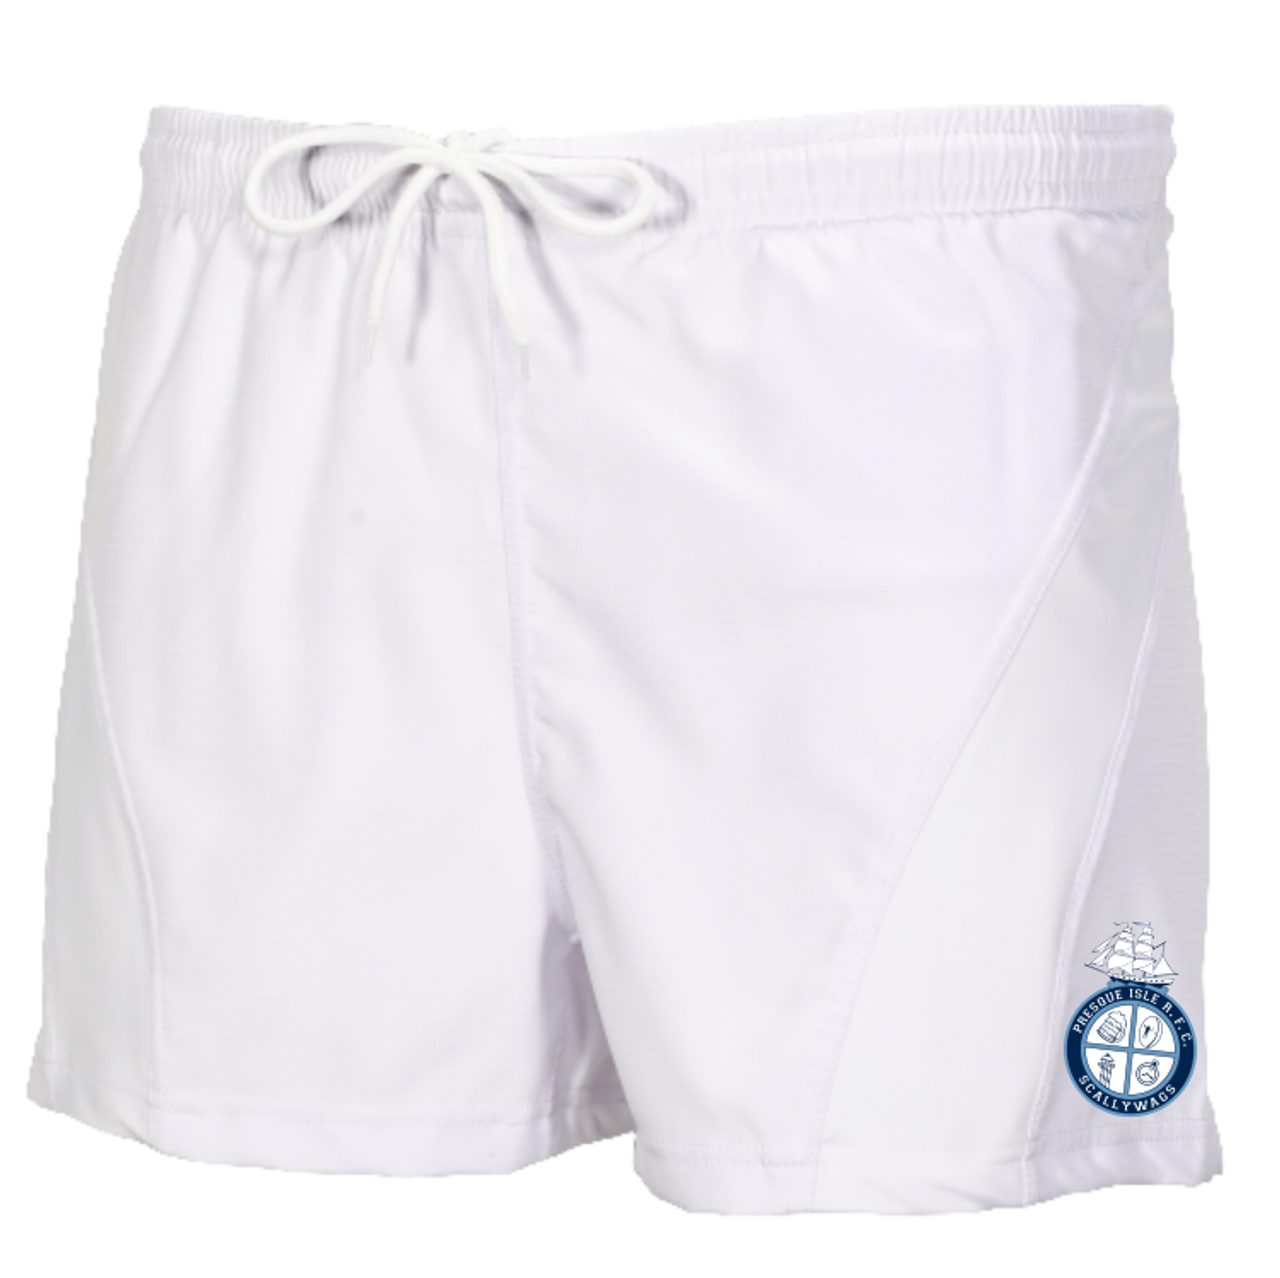 Scallywaygs SRS Performance Rugby Shorts